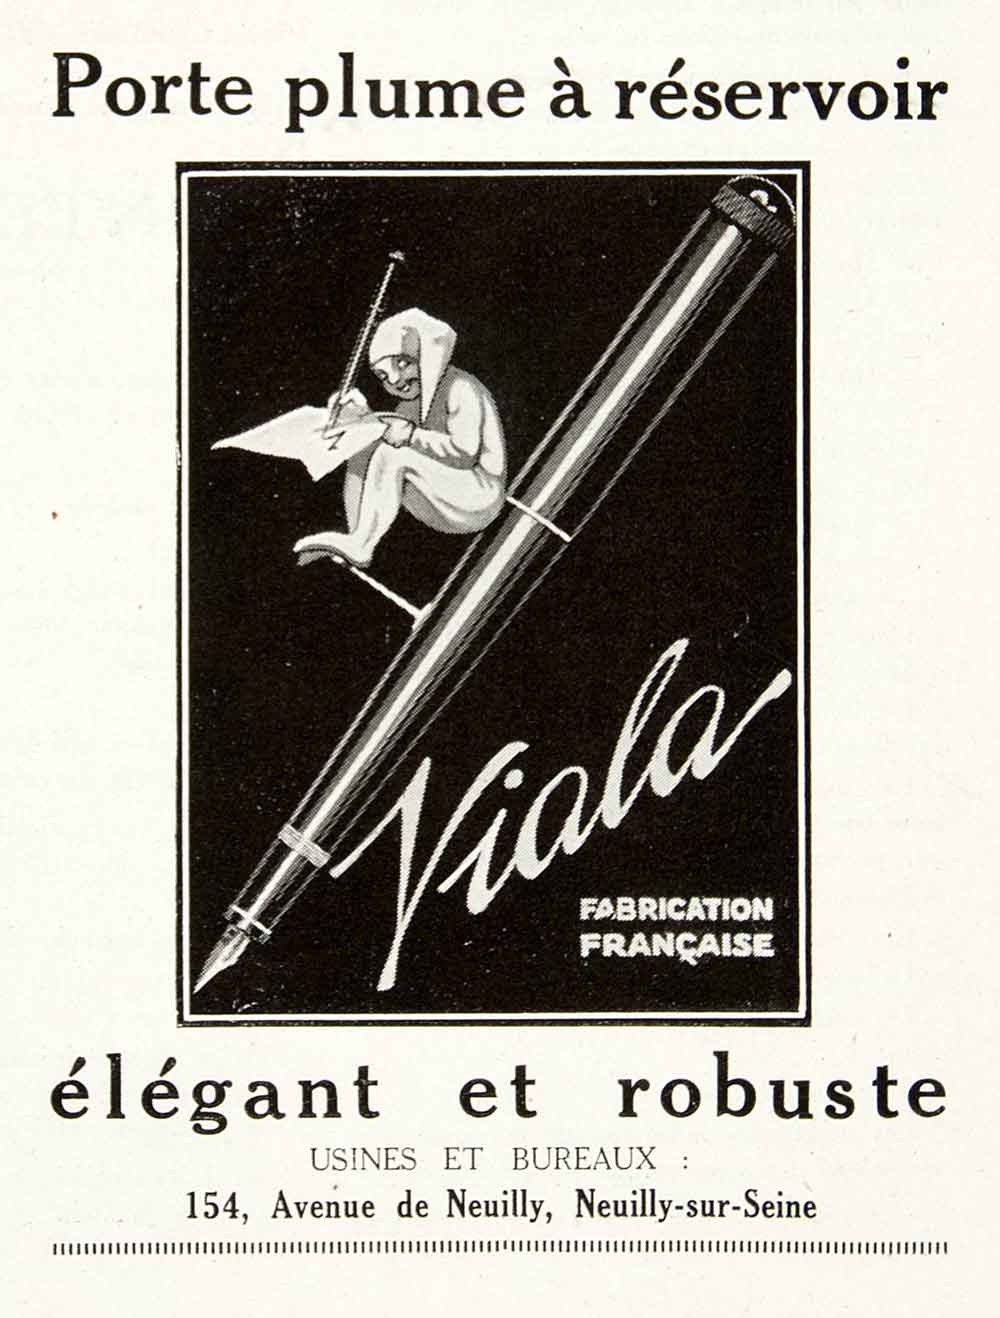 1924 Ad Viala Fountain Pen Reservoir 154 Avenue Neuilly French Writing VEN3